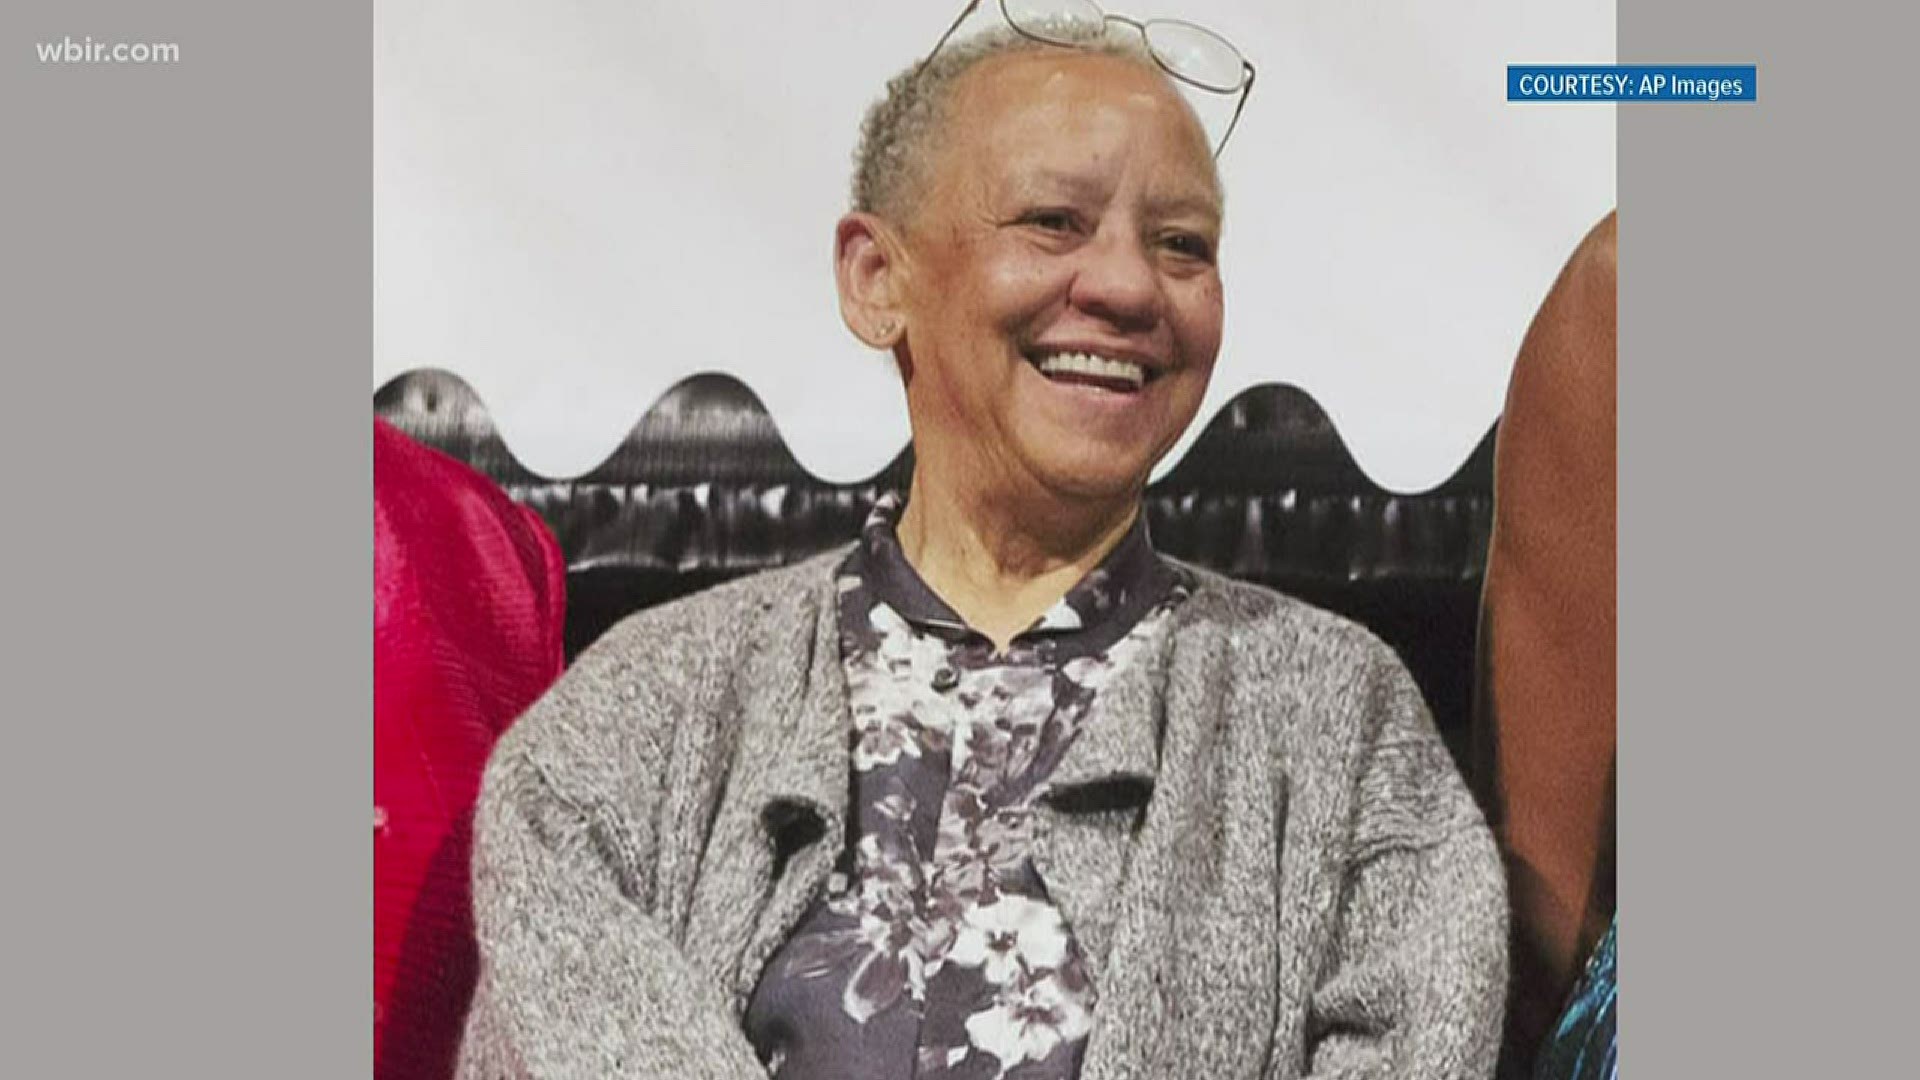 It's no secret poet and civil rights activist Nikki Giovanni has a way with words, especially in times when they matter most.